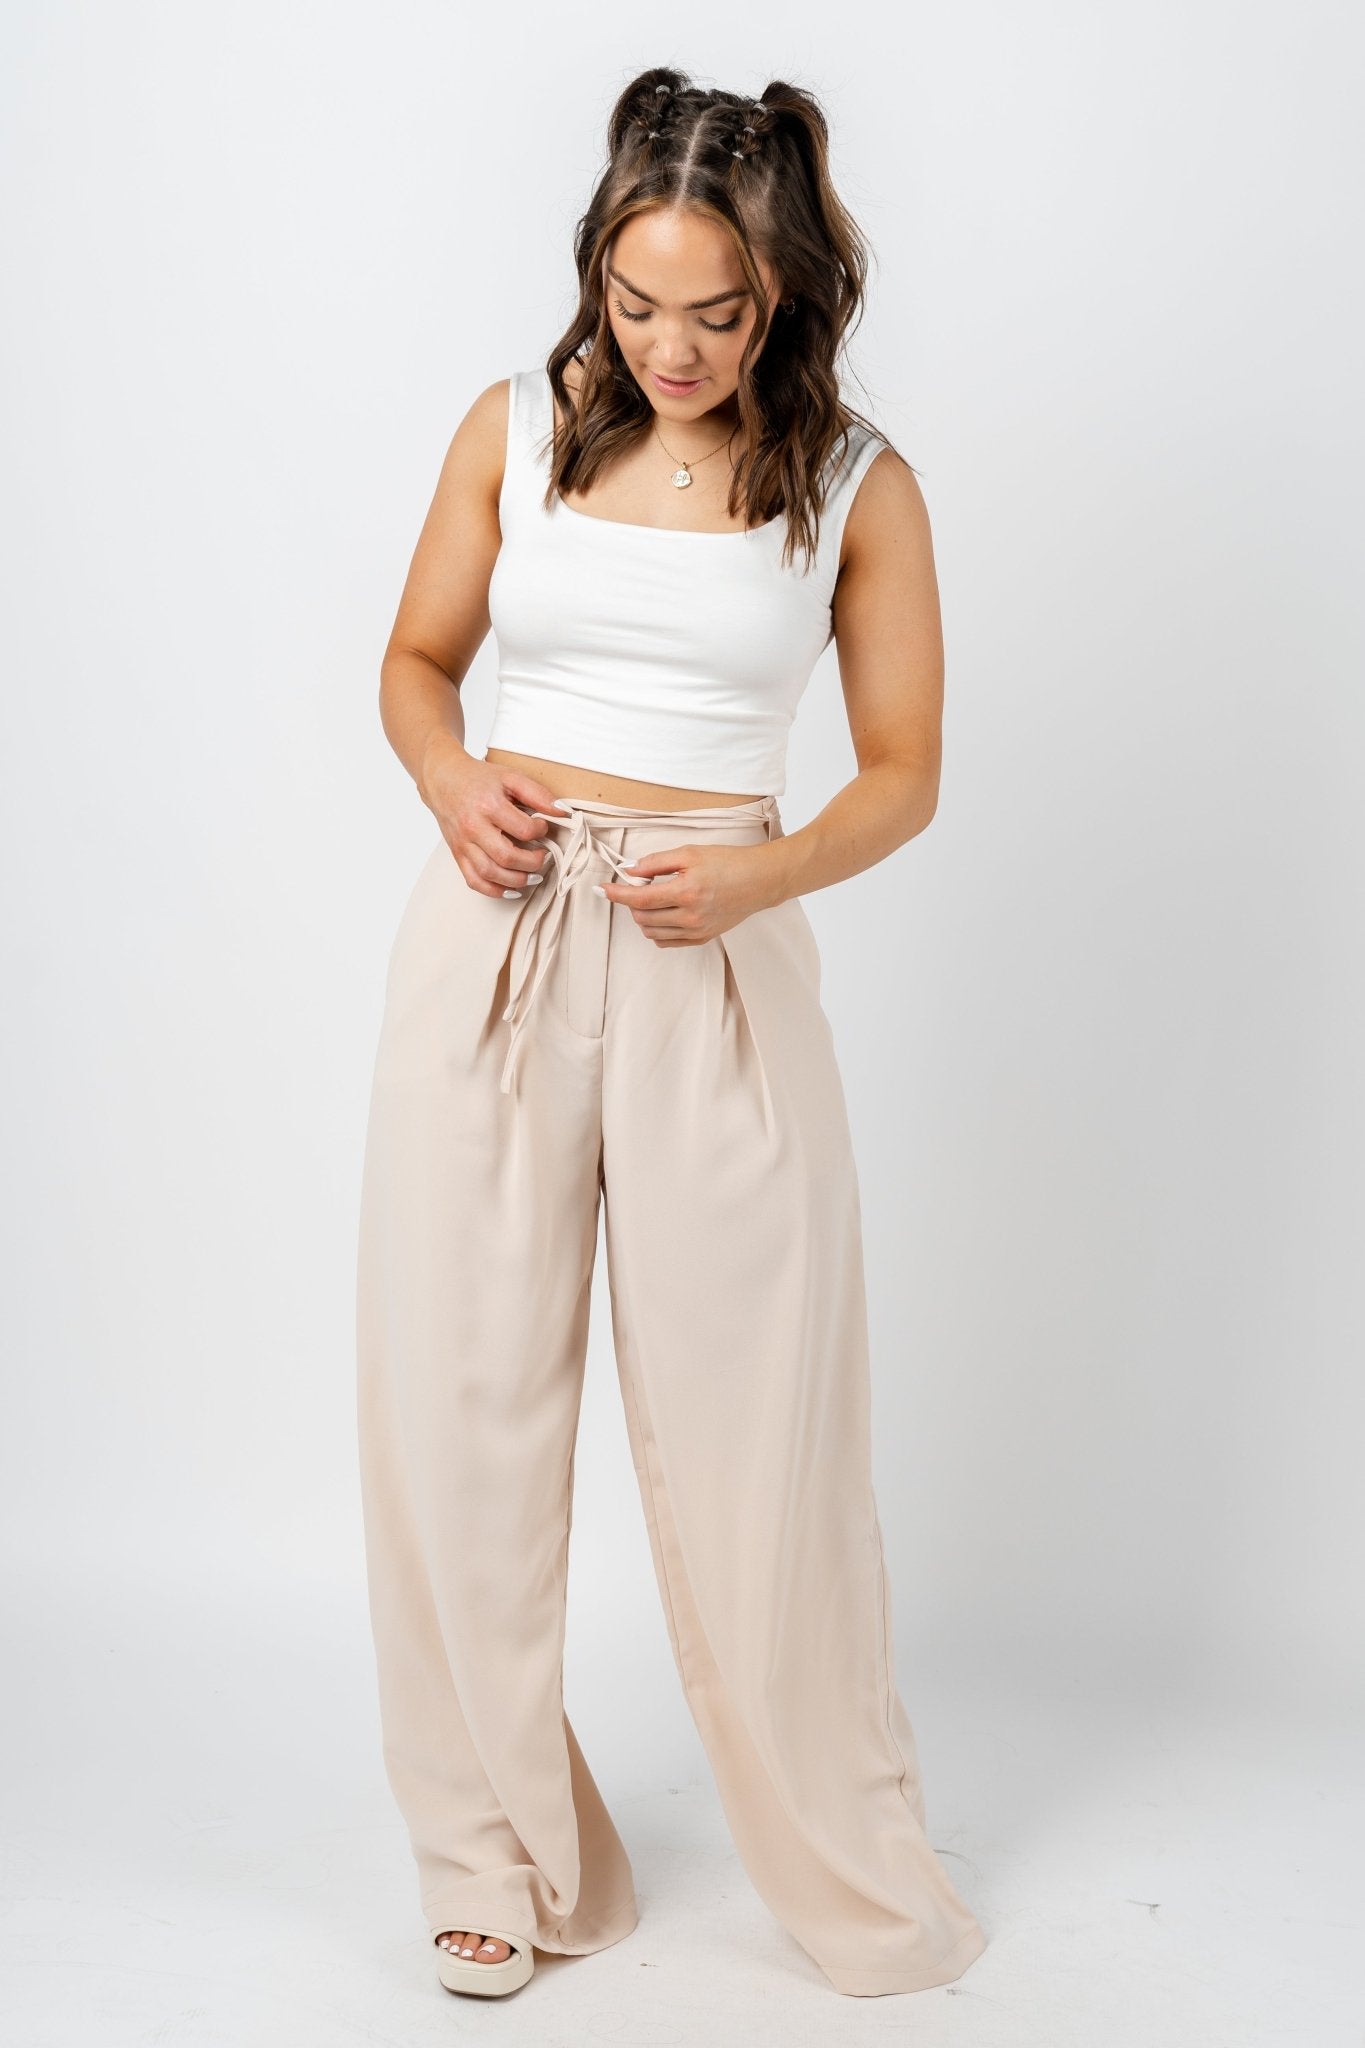 High waist wide leg pants natural - Stylish Pants - Trendy Staycation Outfits at Lush Fashion Lounge Boutique in Oklahoma City